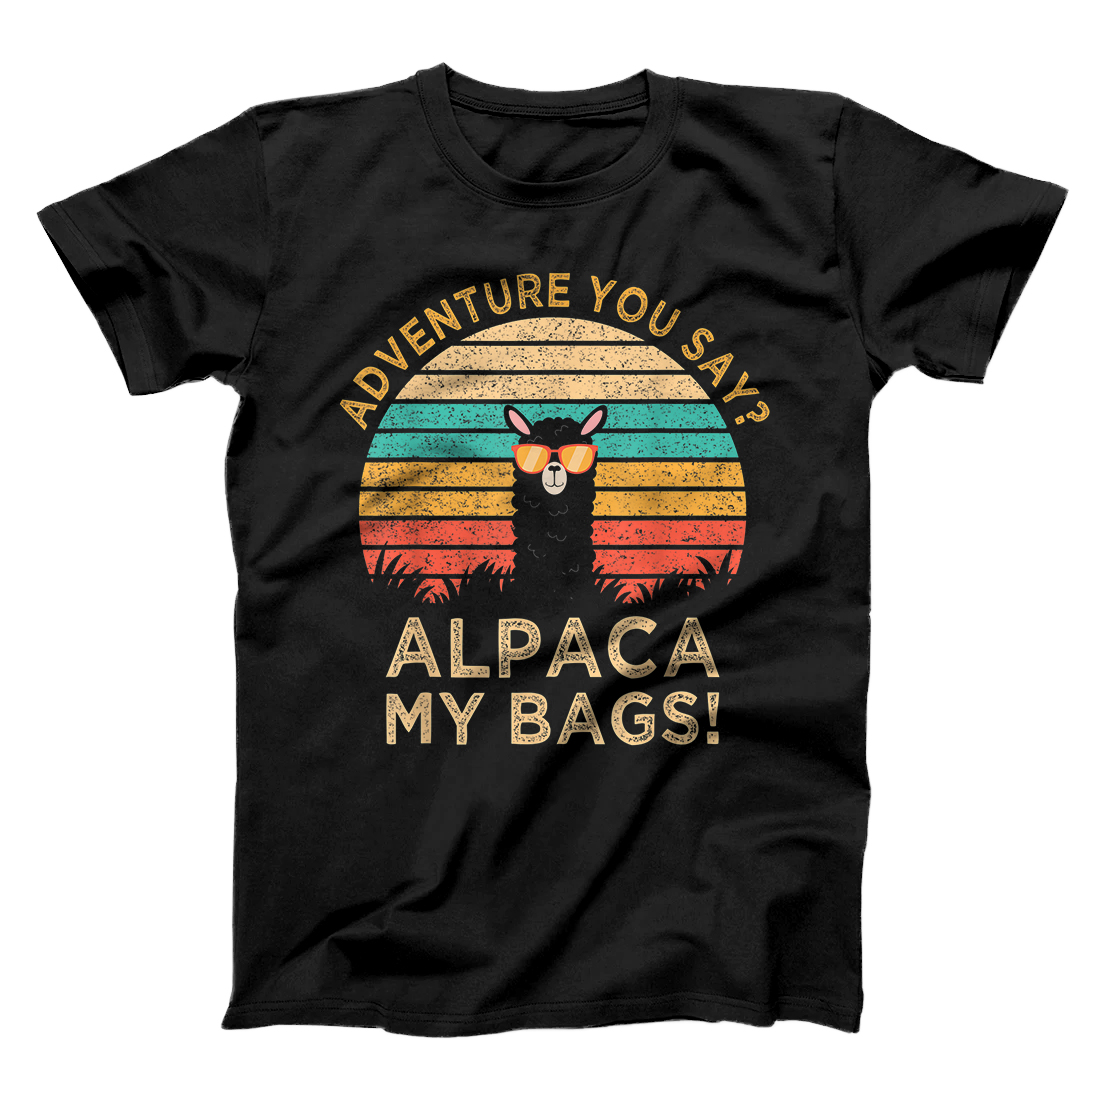 Personalized Adventure You Say? Alpaca My Bags Vintage Funny Travel Gift T-Shirt